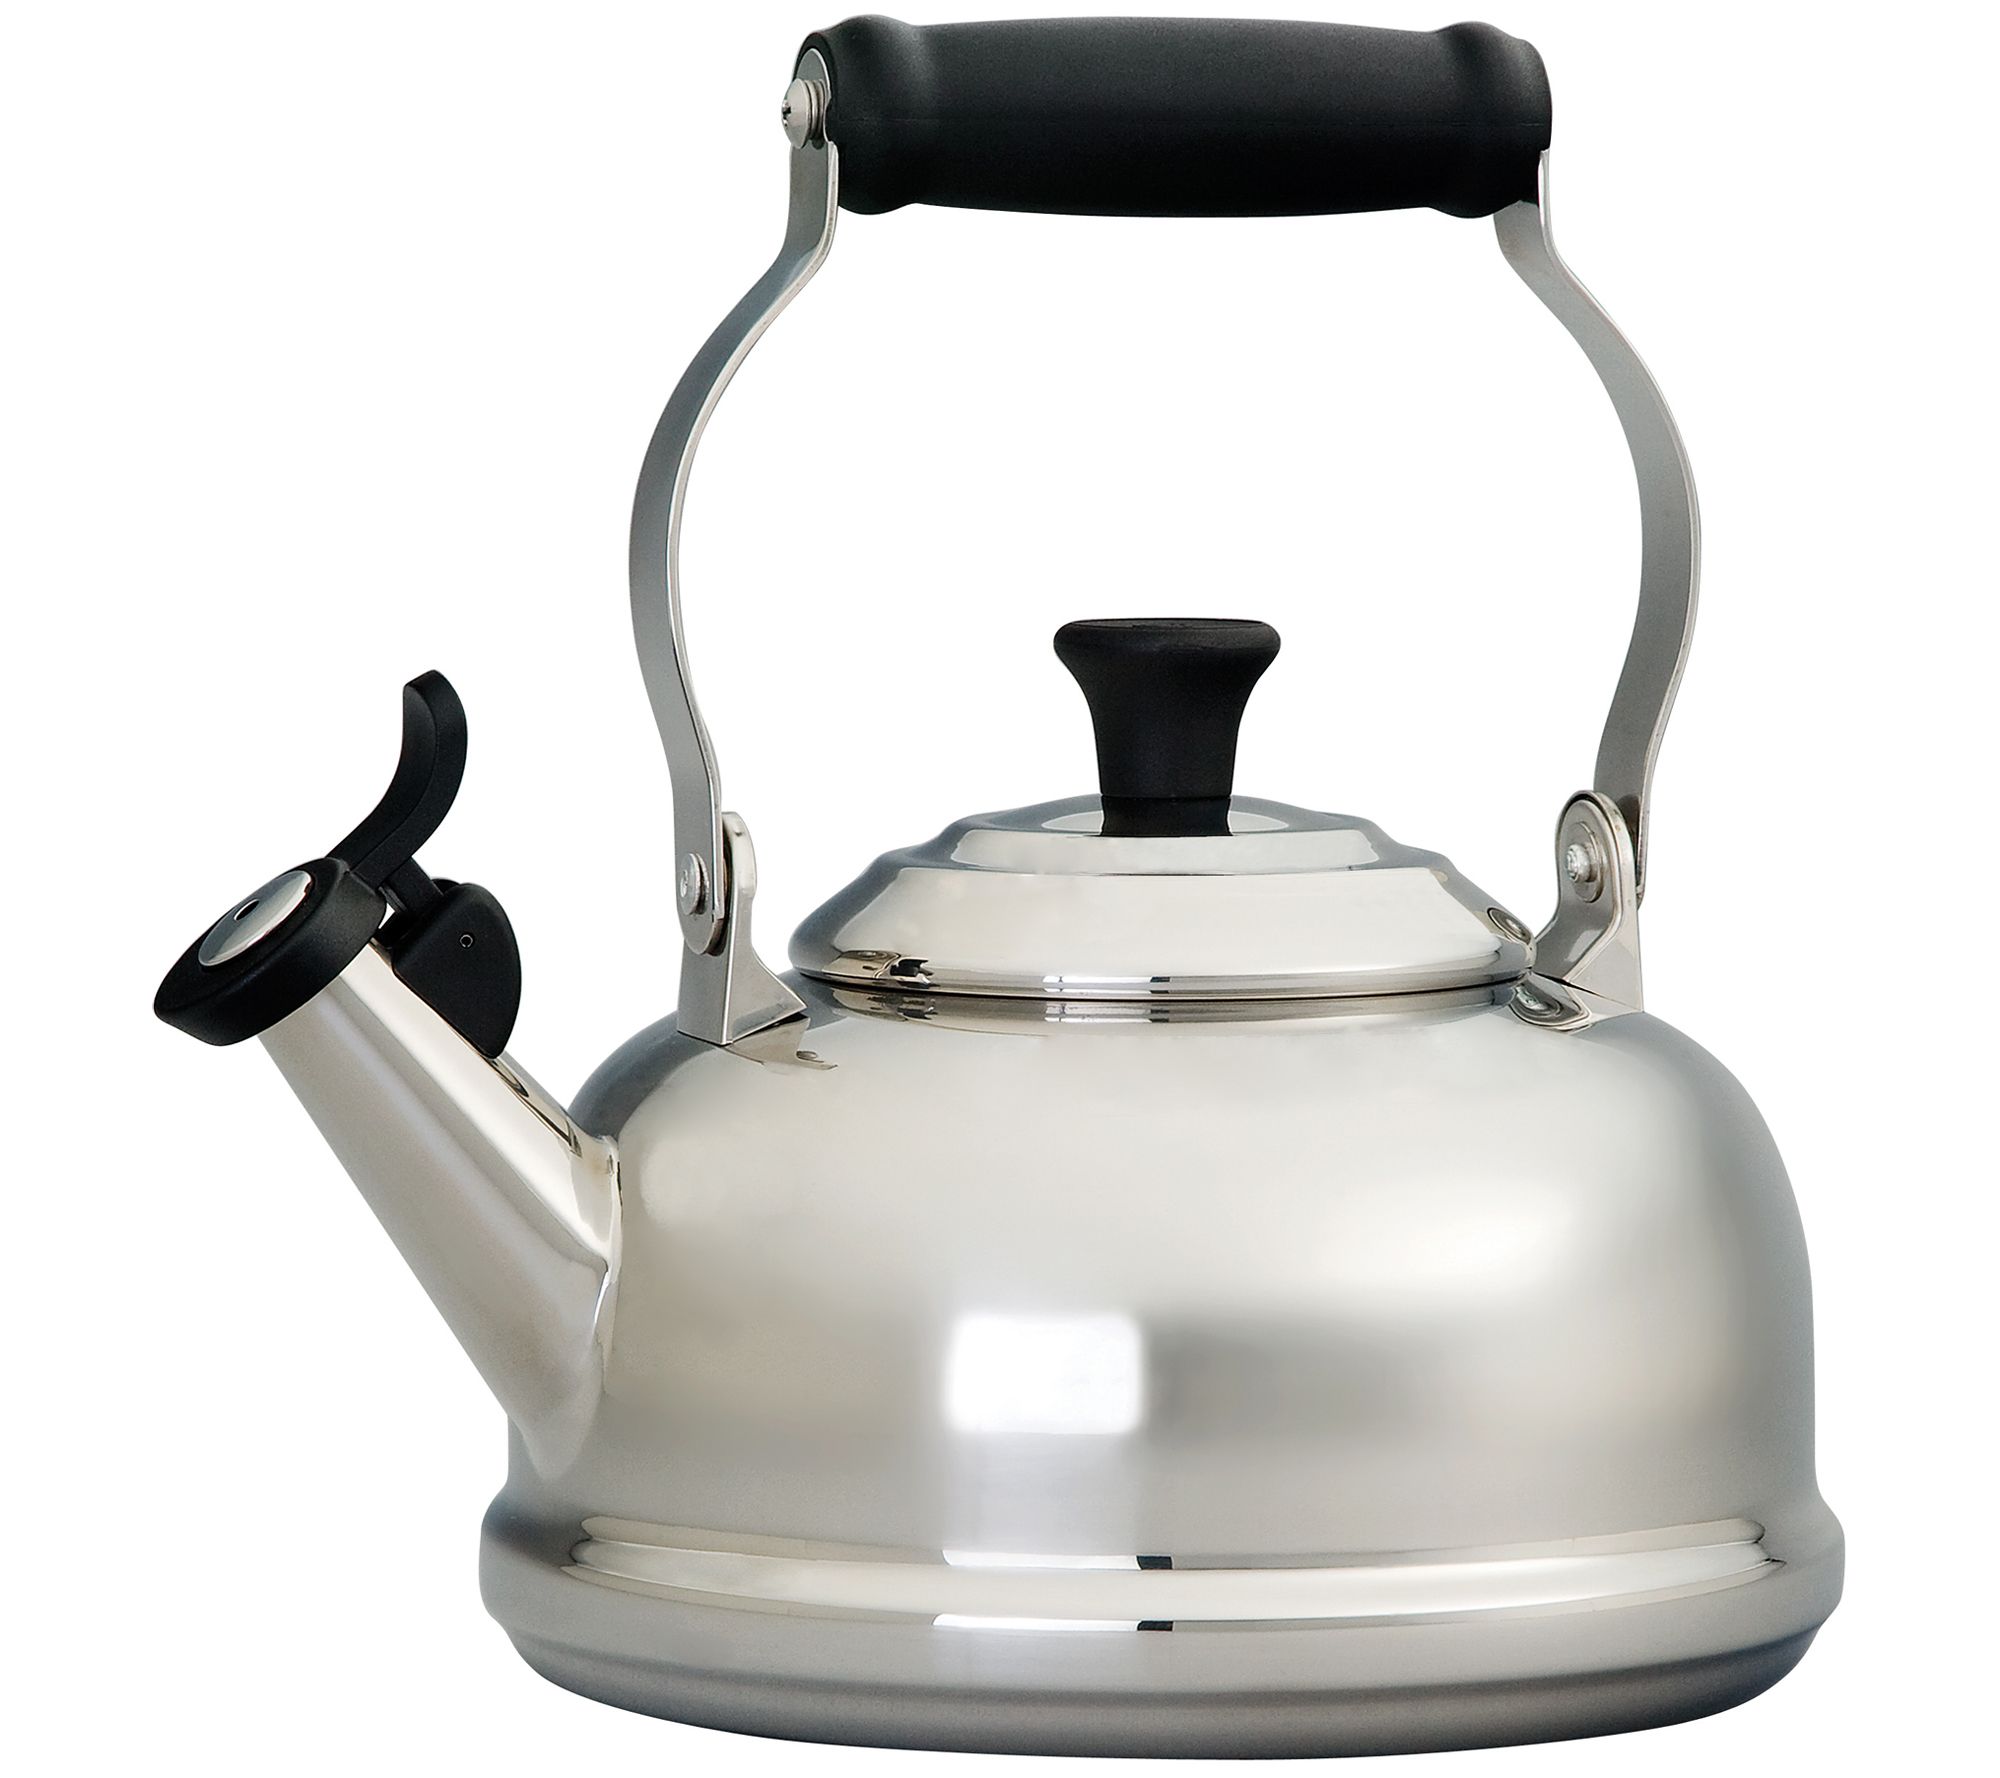  Viking Culinary 3-Ply Stainless Steel Whistling Tea